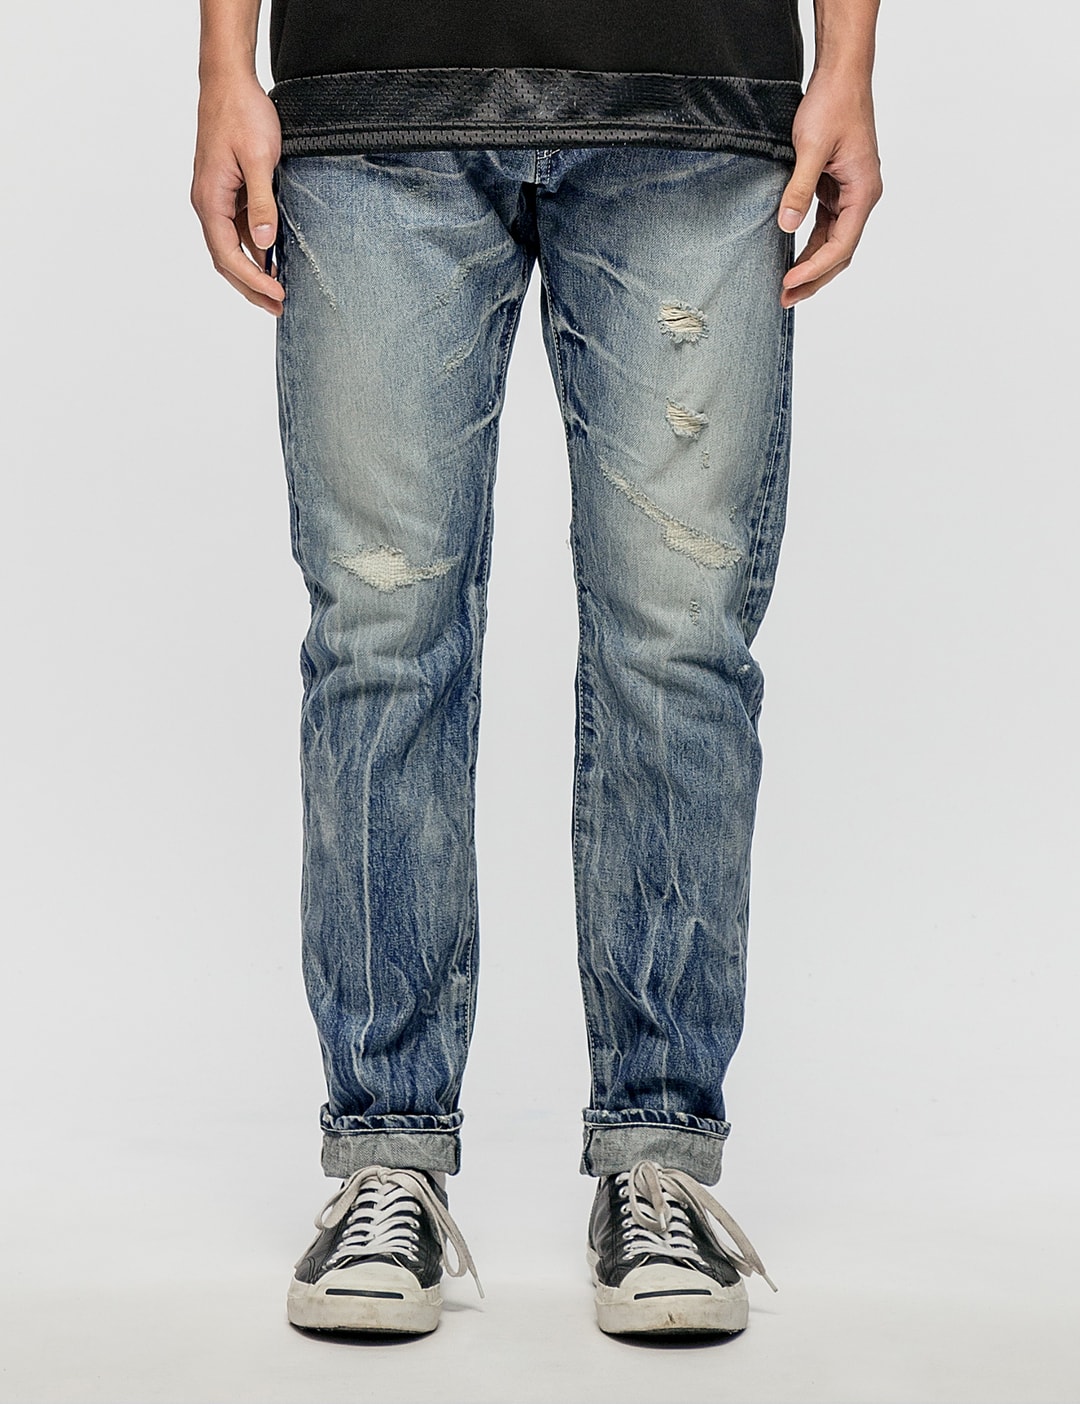 Liever lezer residentie Denim By Vanquish & Fragment - Three Years Wash Regular Straight Denim Jeans  | HBX - Globally Curated Fashion and Lifestyle by Hypebeast